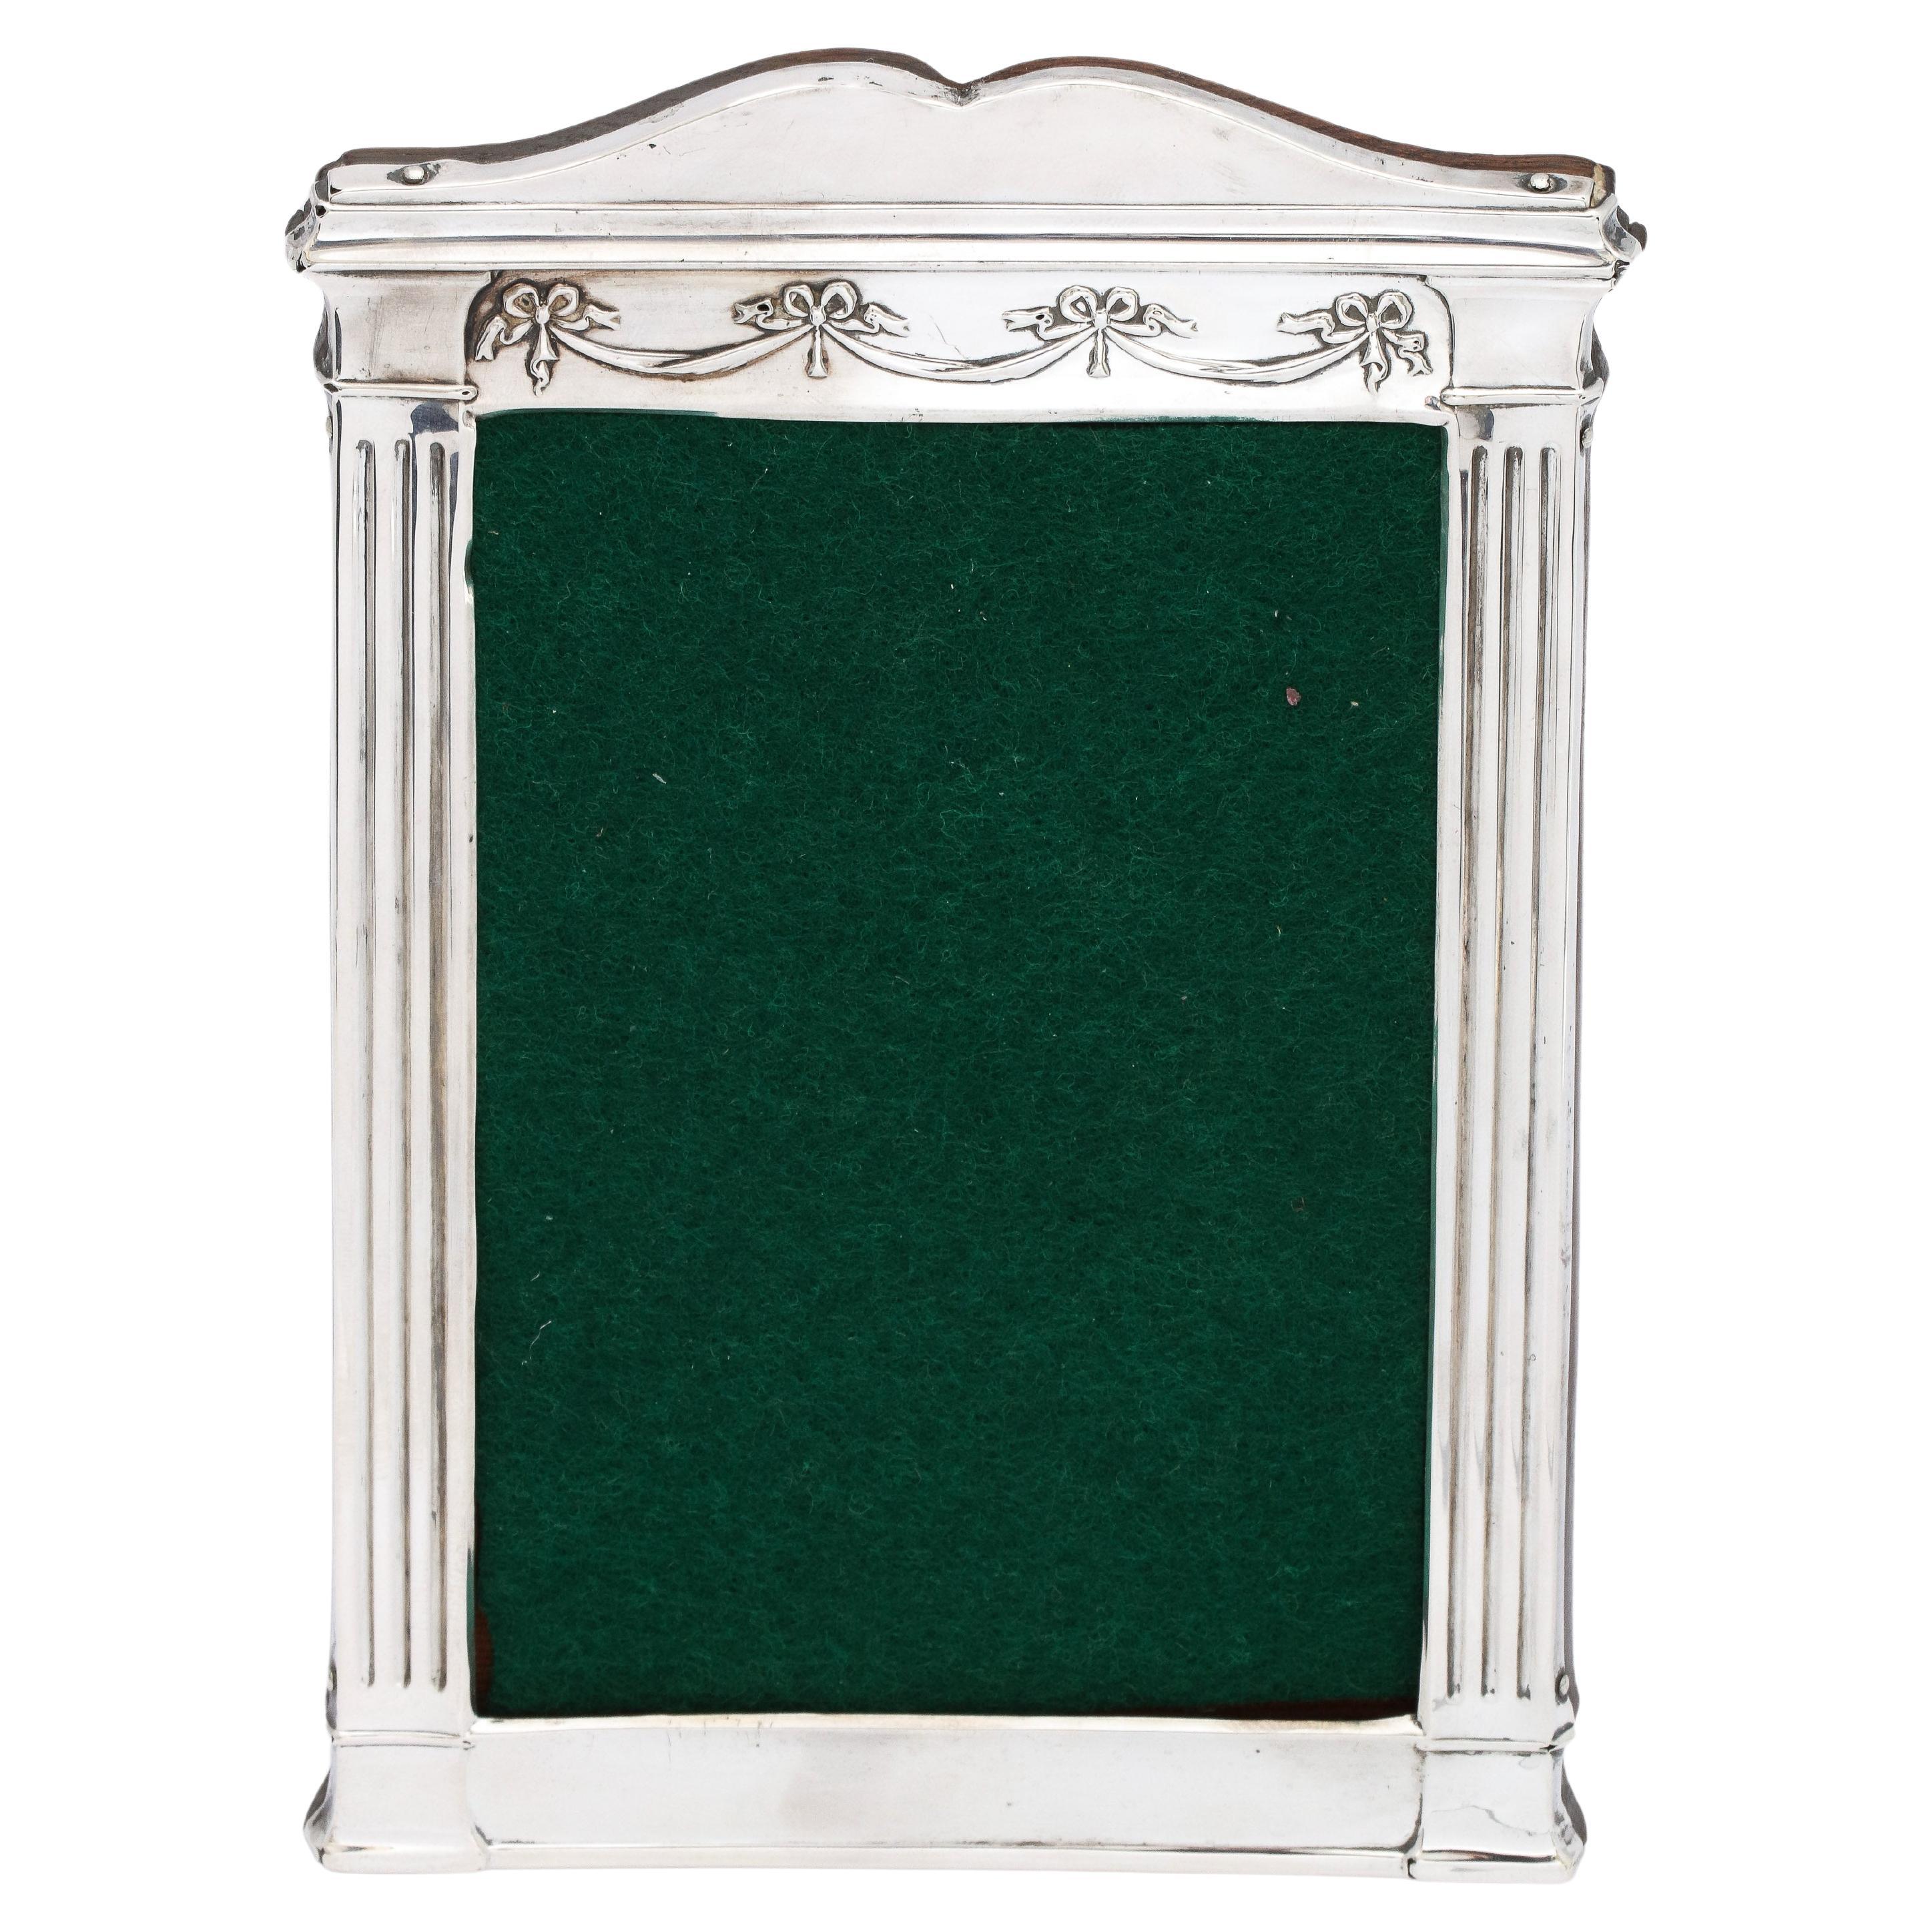  Unusual Edwardian Neoclassical Style Sterling Silver Wood-Backed Picture Frame